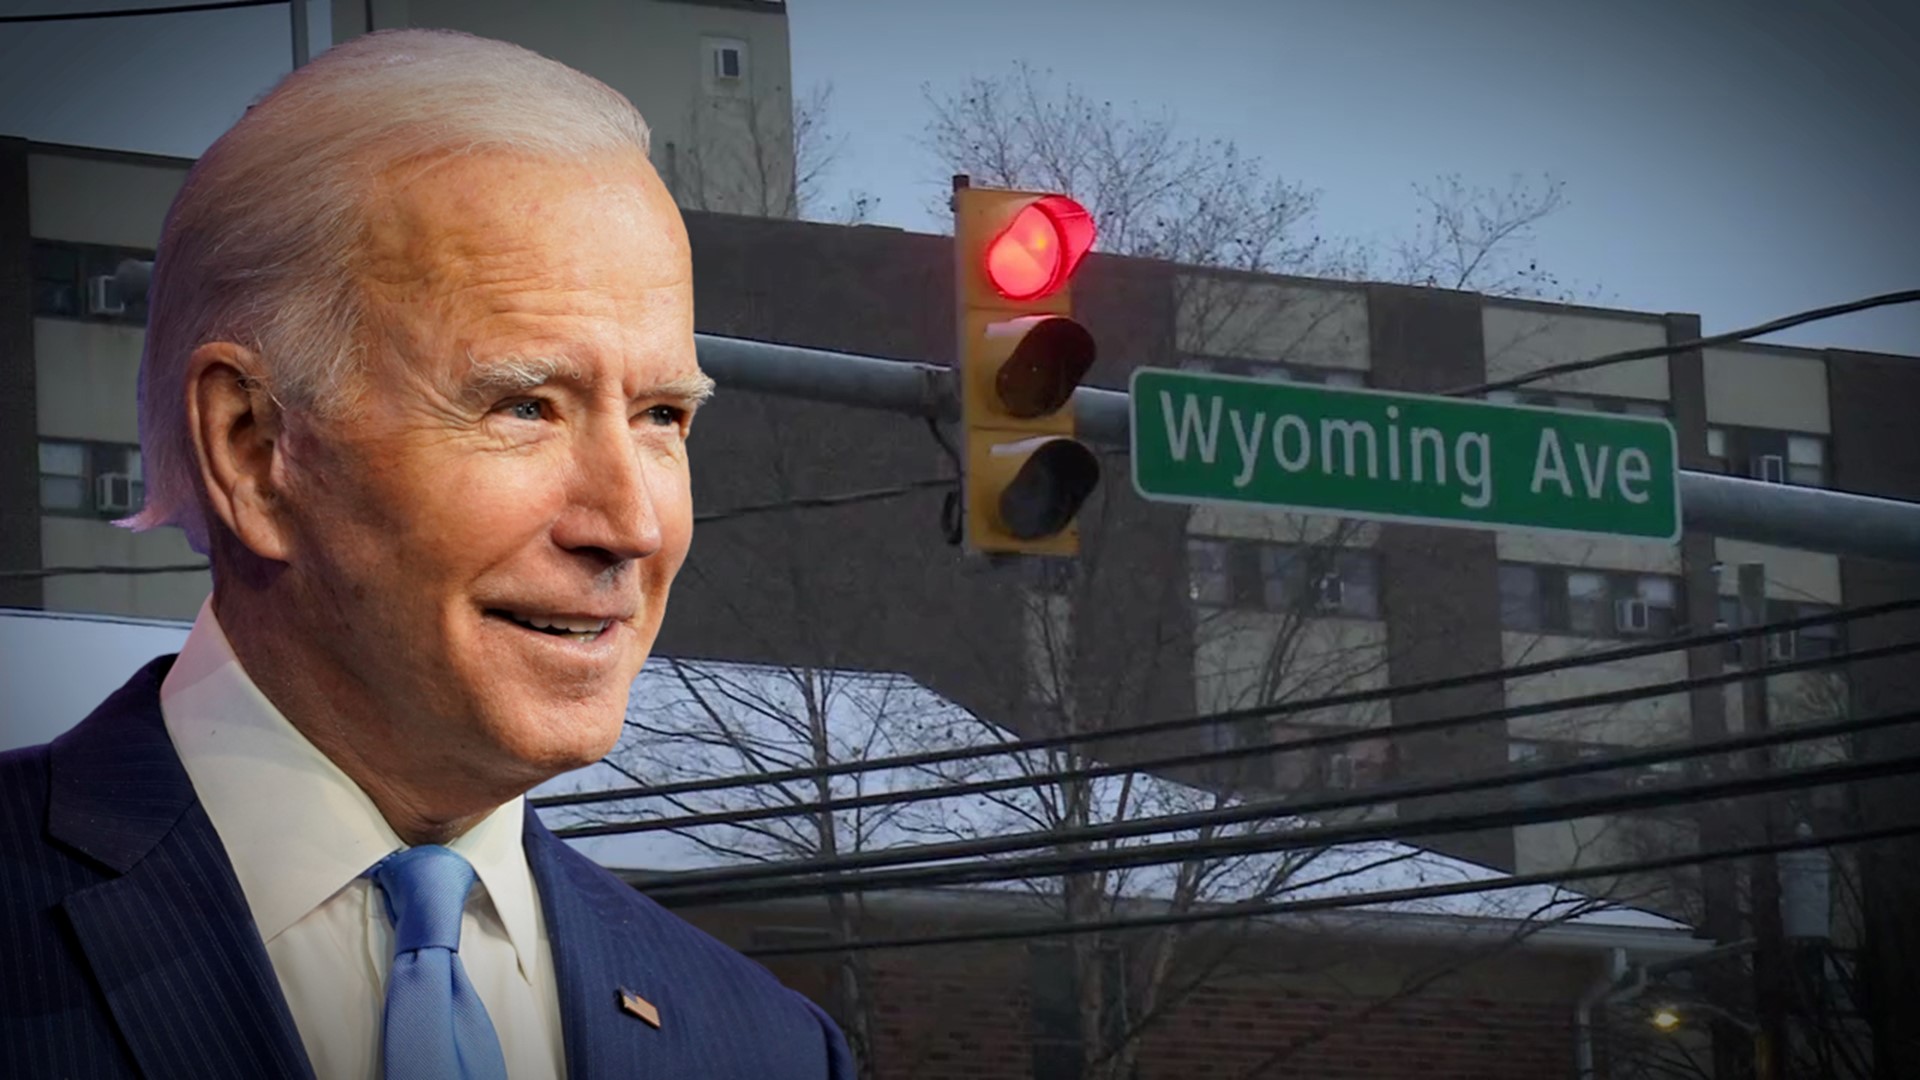 The idea was brought up by Council President Bill Gaughan as a way to honor Biden.